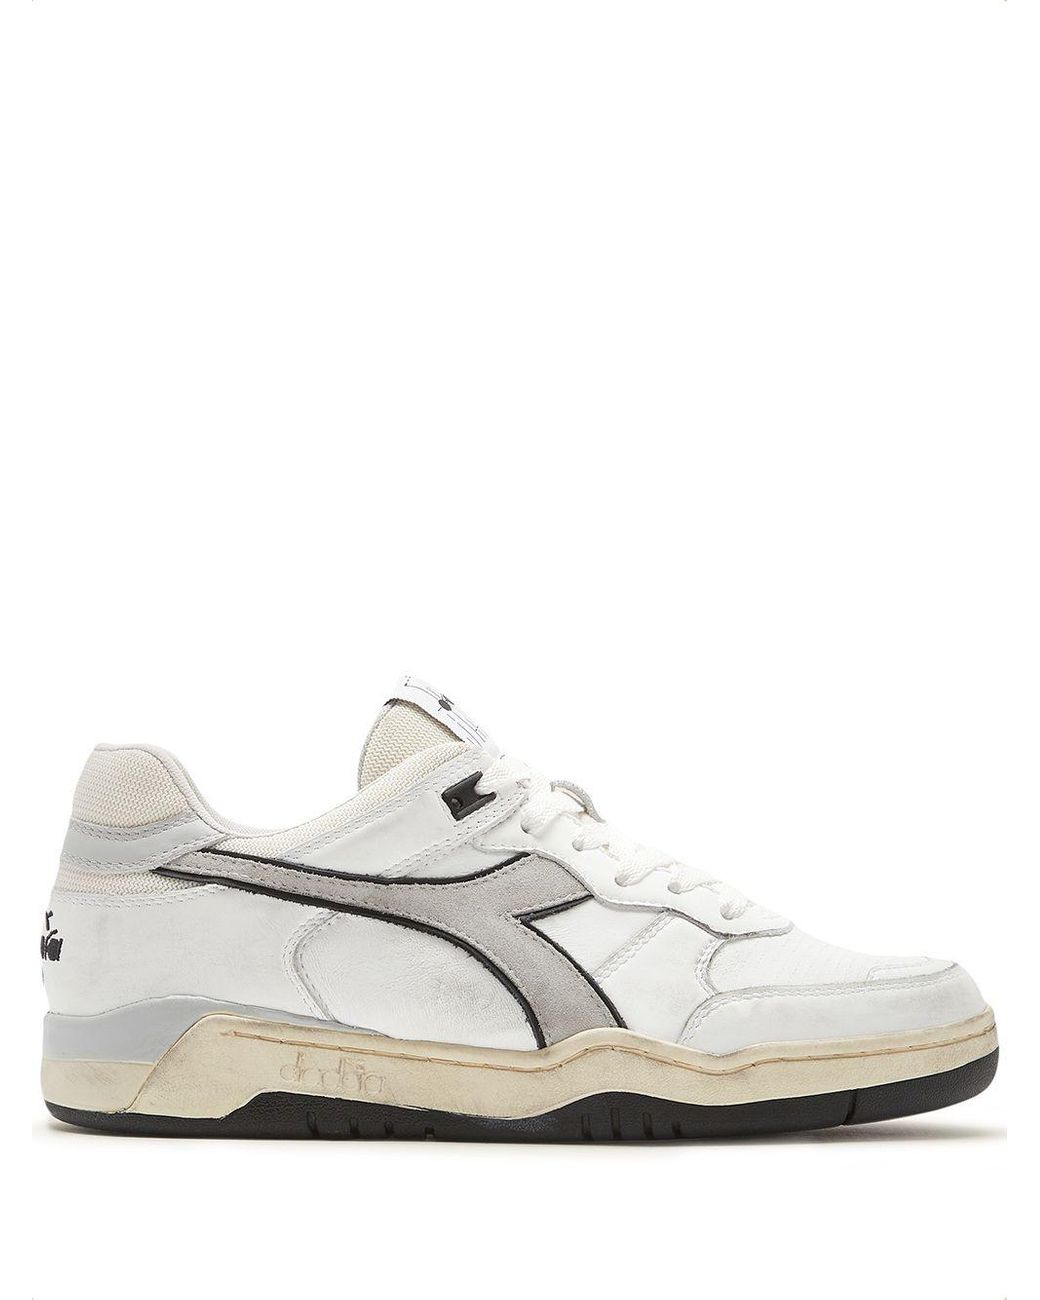 Diadora B.560 Used Italy Sneakers in White | Lyst